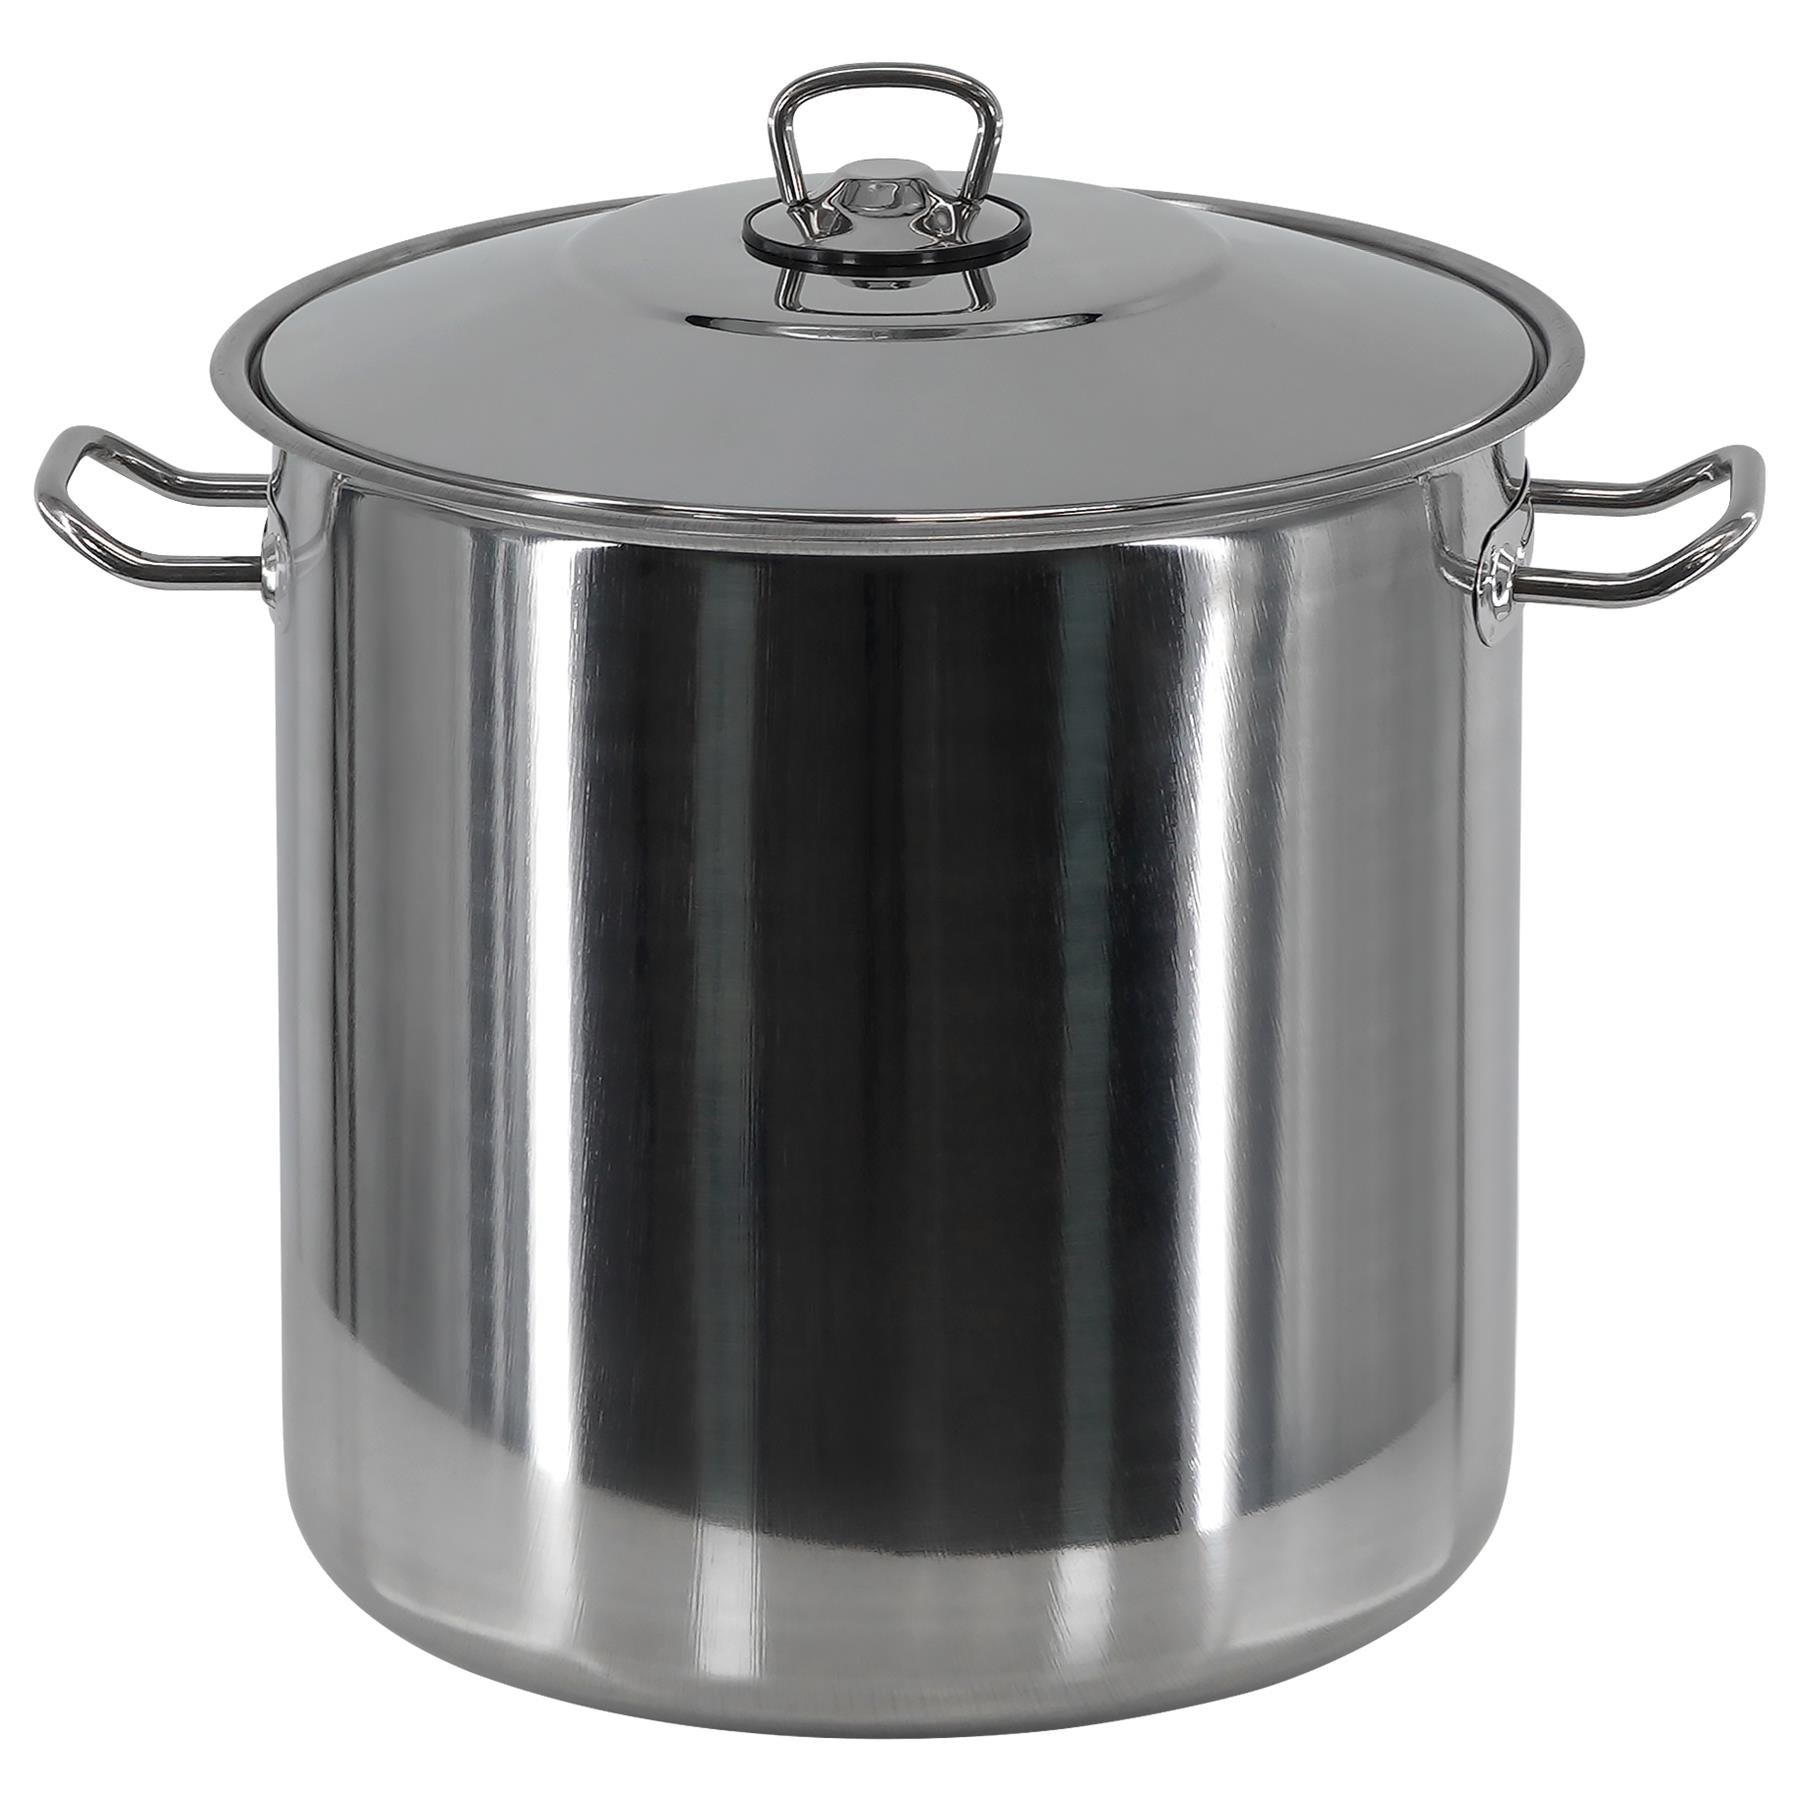 Arian Gastro Stock Pot - 11 Litre by GEEZY - UKBuyZone